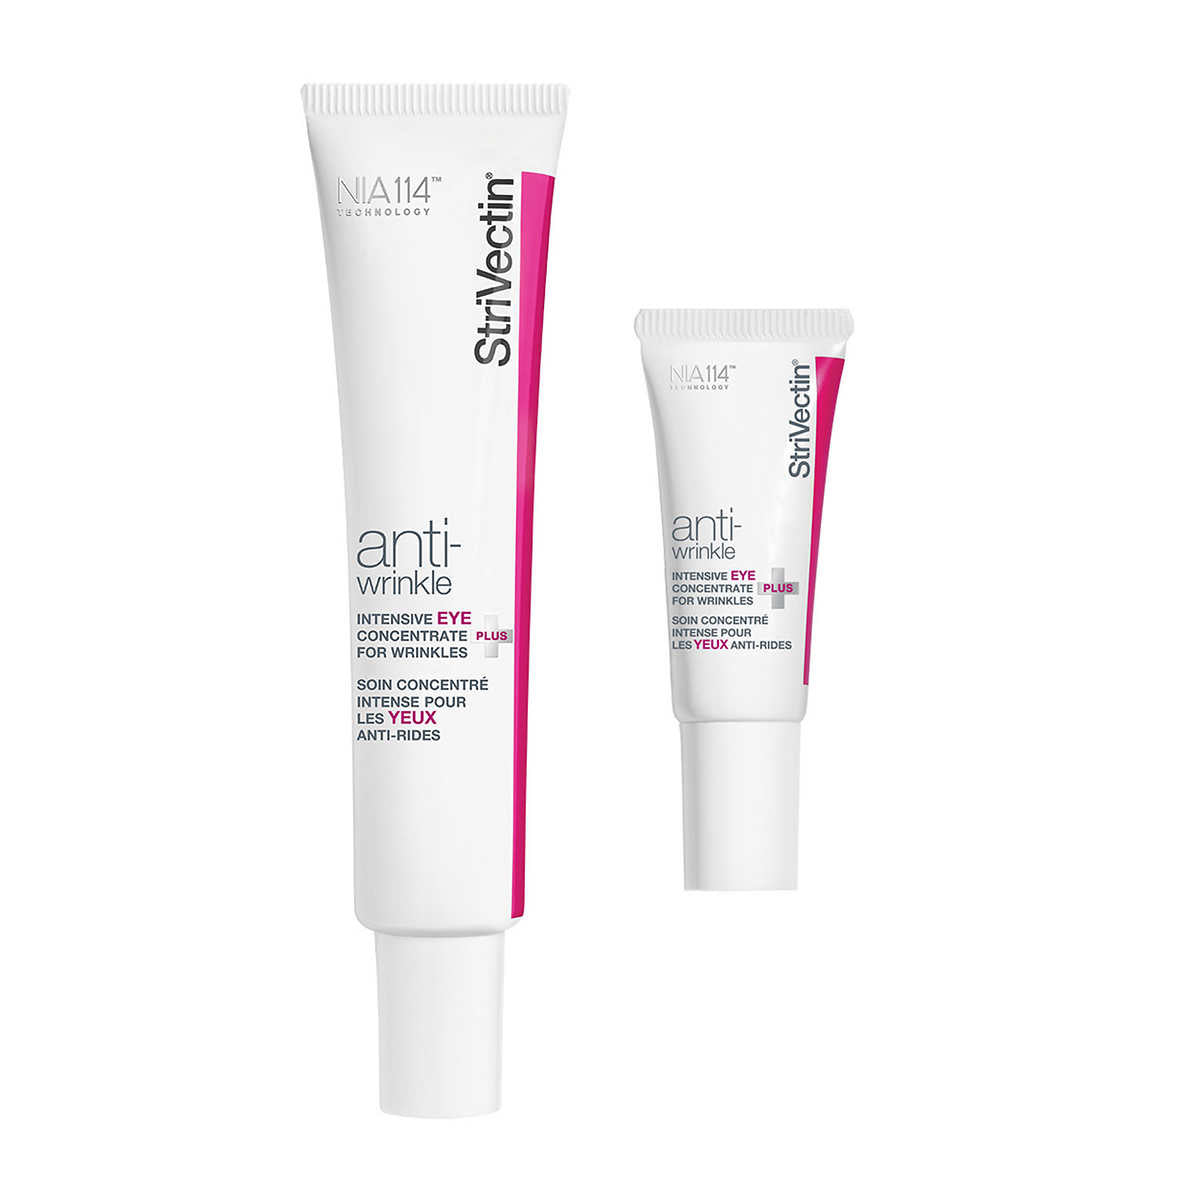 StriVectin Intensive Eye Concentrate for Wrinkles PLUS Set of 2